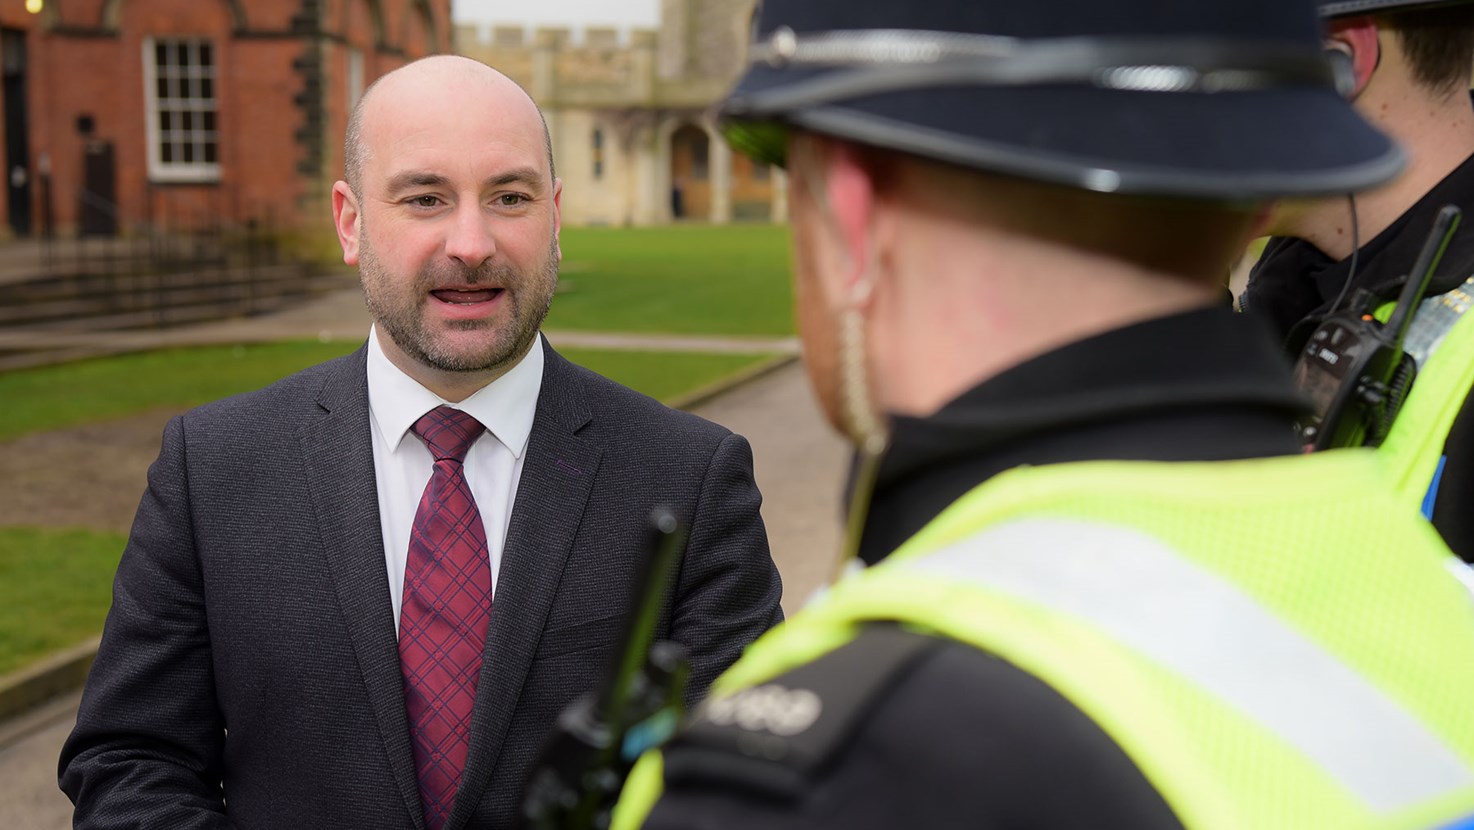 Support for council tax increase will see an additional £2.4m towards visible policing and protecting communities